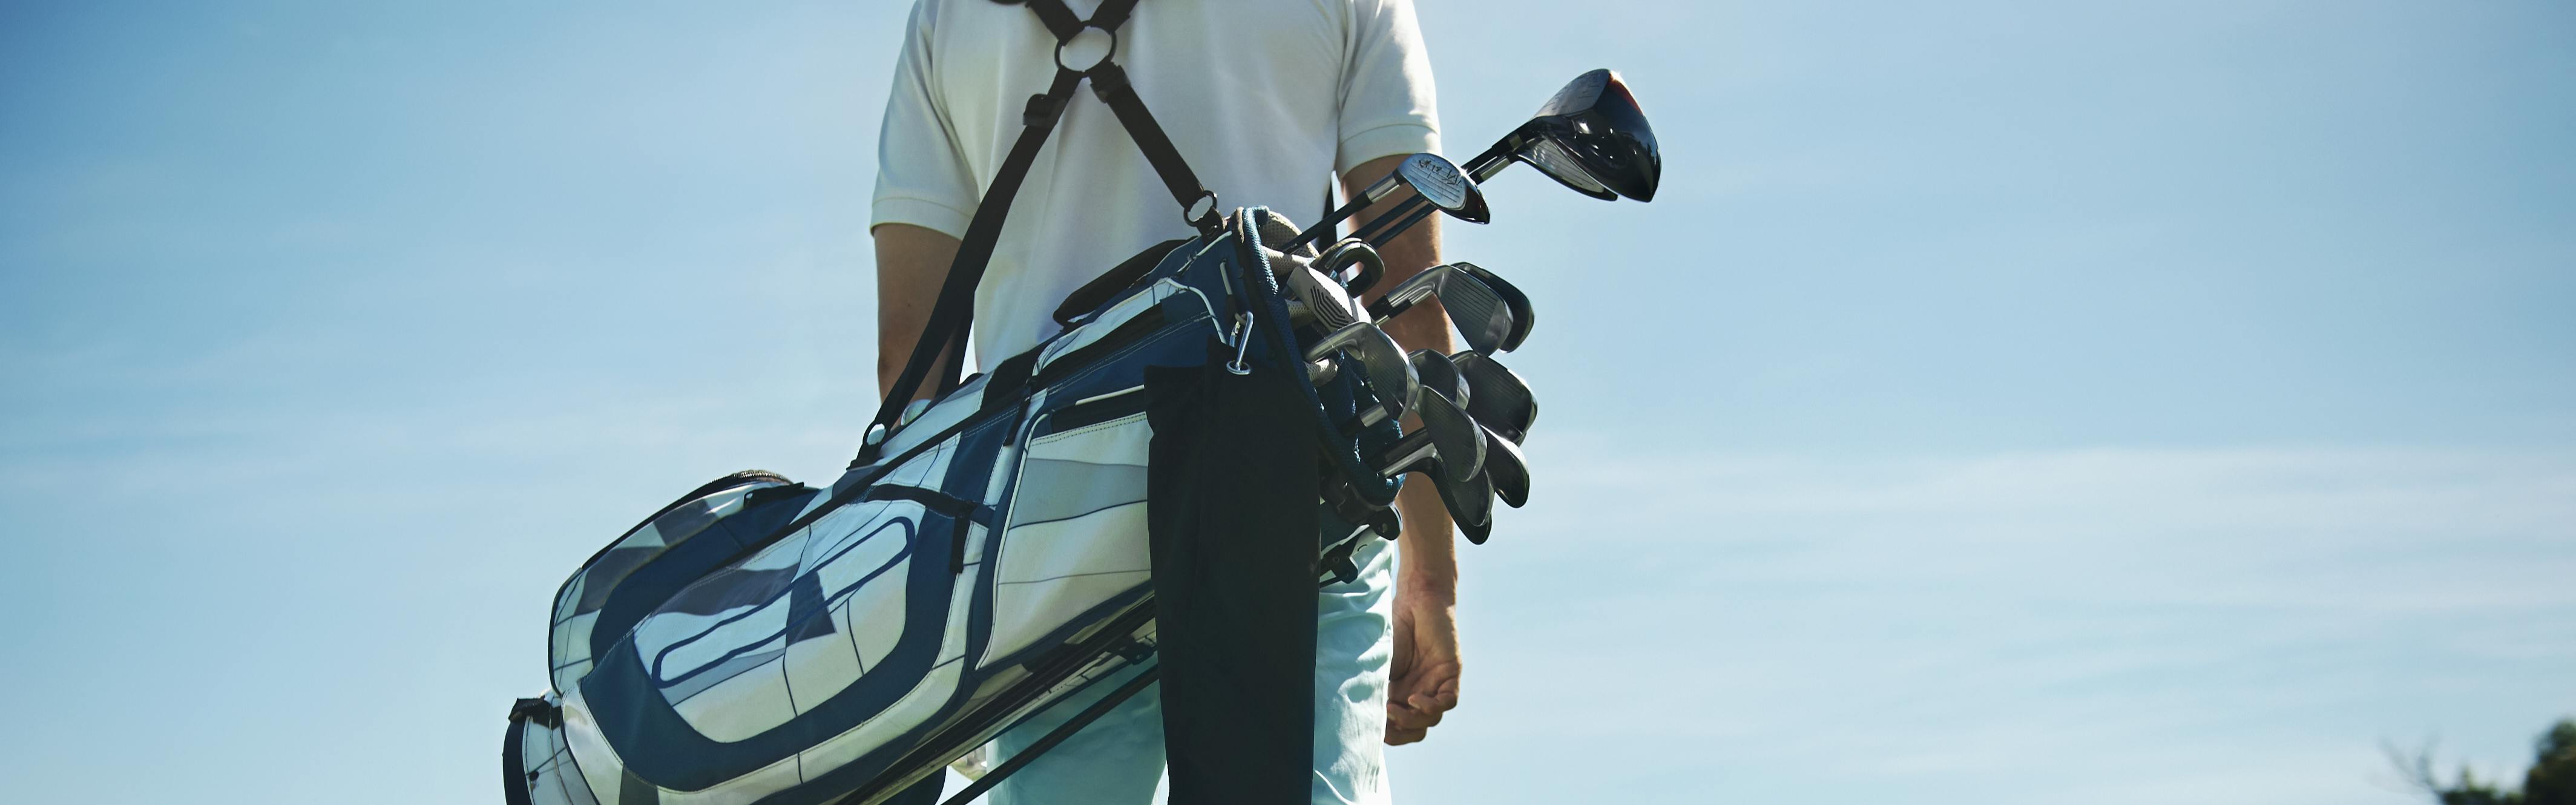 What's In Your Golf Bag? - Best Combination of Clubs - Free Online